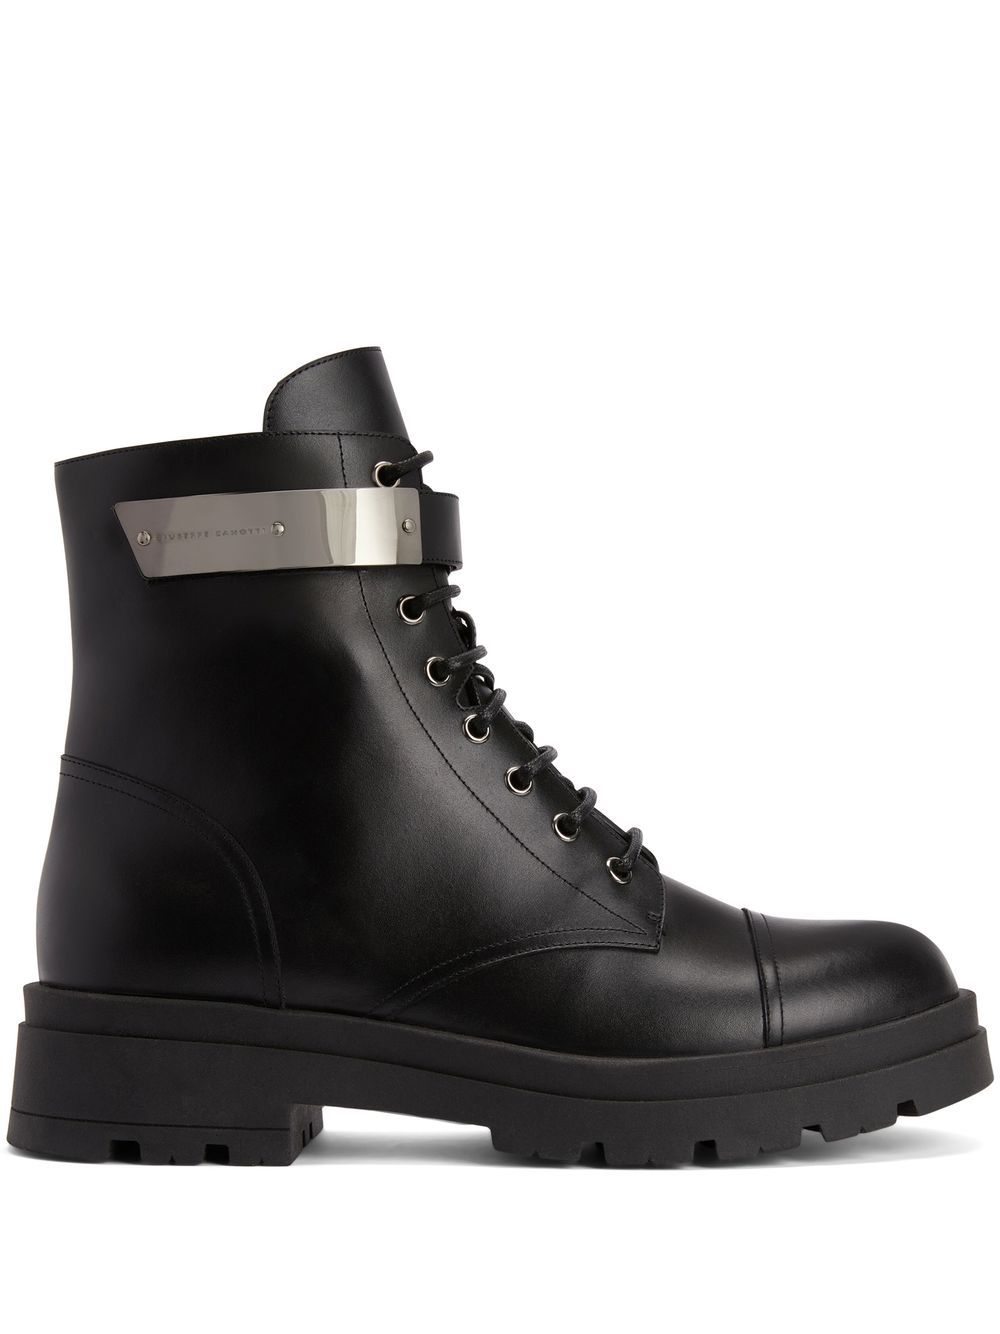 Giuseppe Zanotti Ruger Leather Ankle Boots - Farfetch